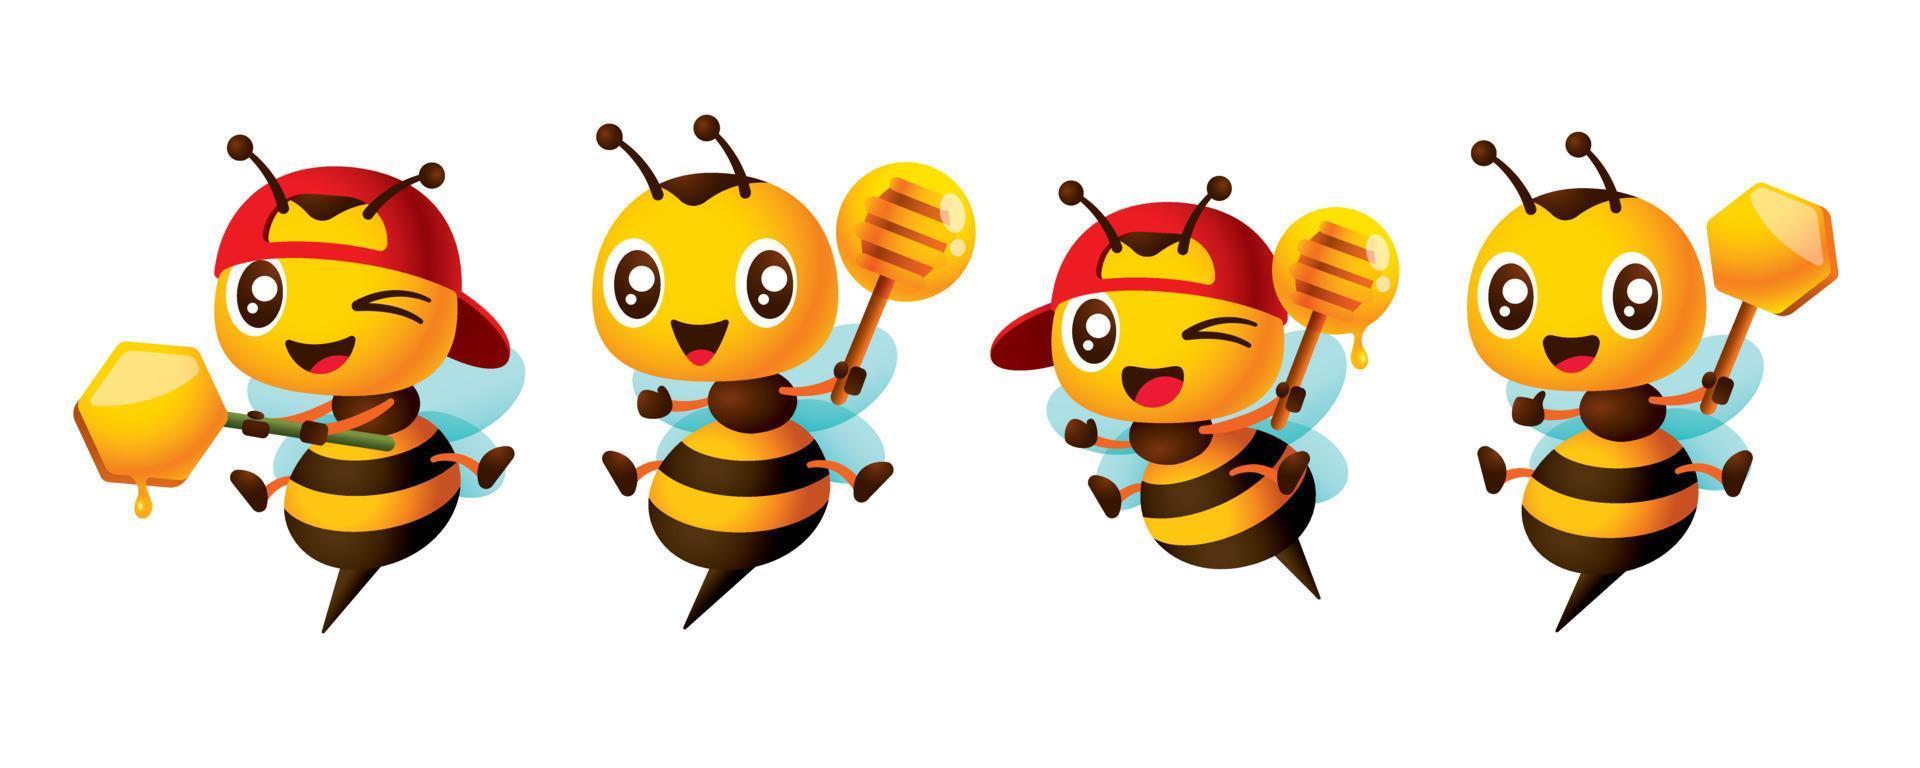 Cartoon cute bee holding honey dipper and honeycomb mascot set. Cartoon honey bee wearing red cap. Collection vector illustration